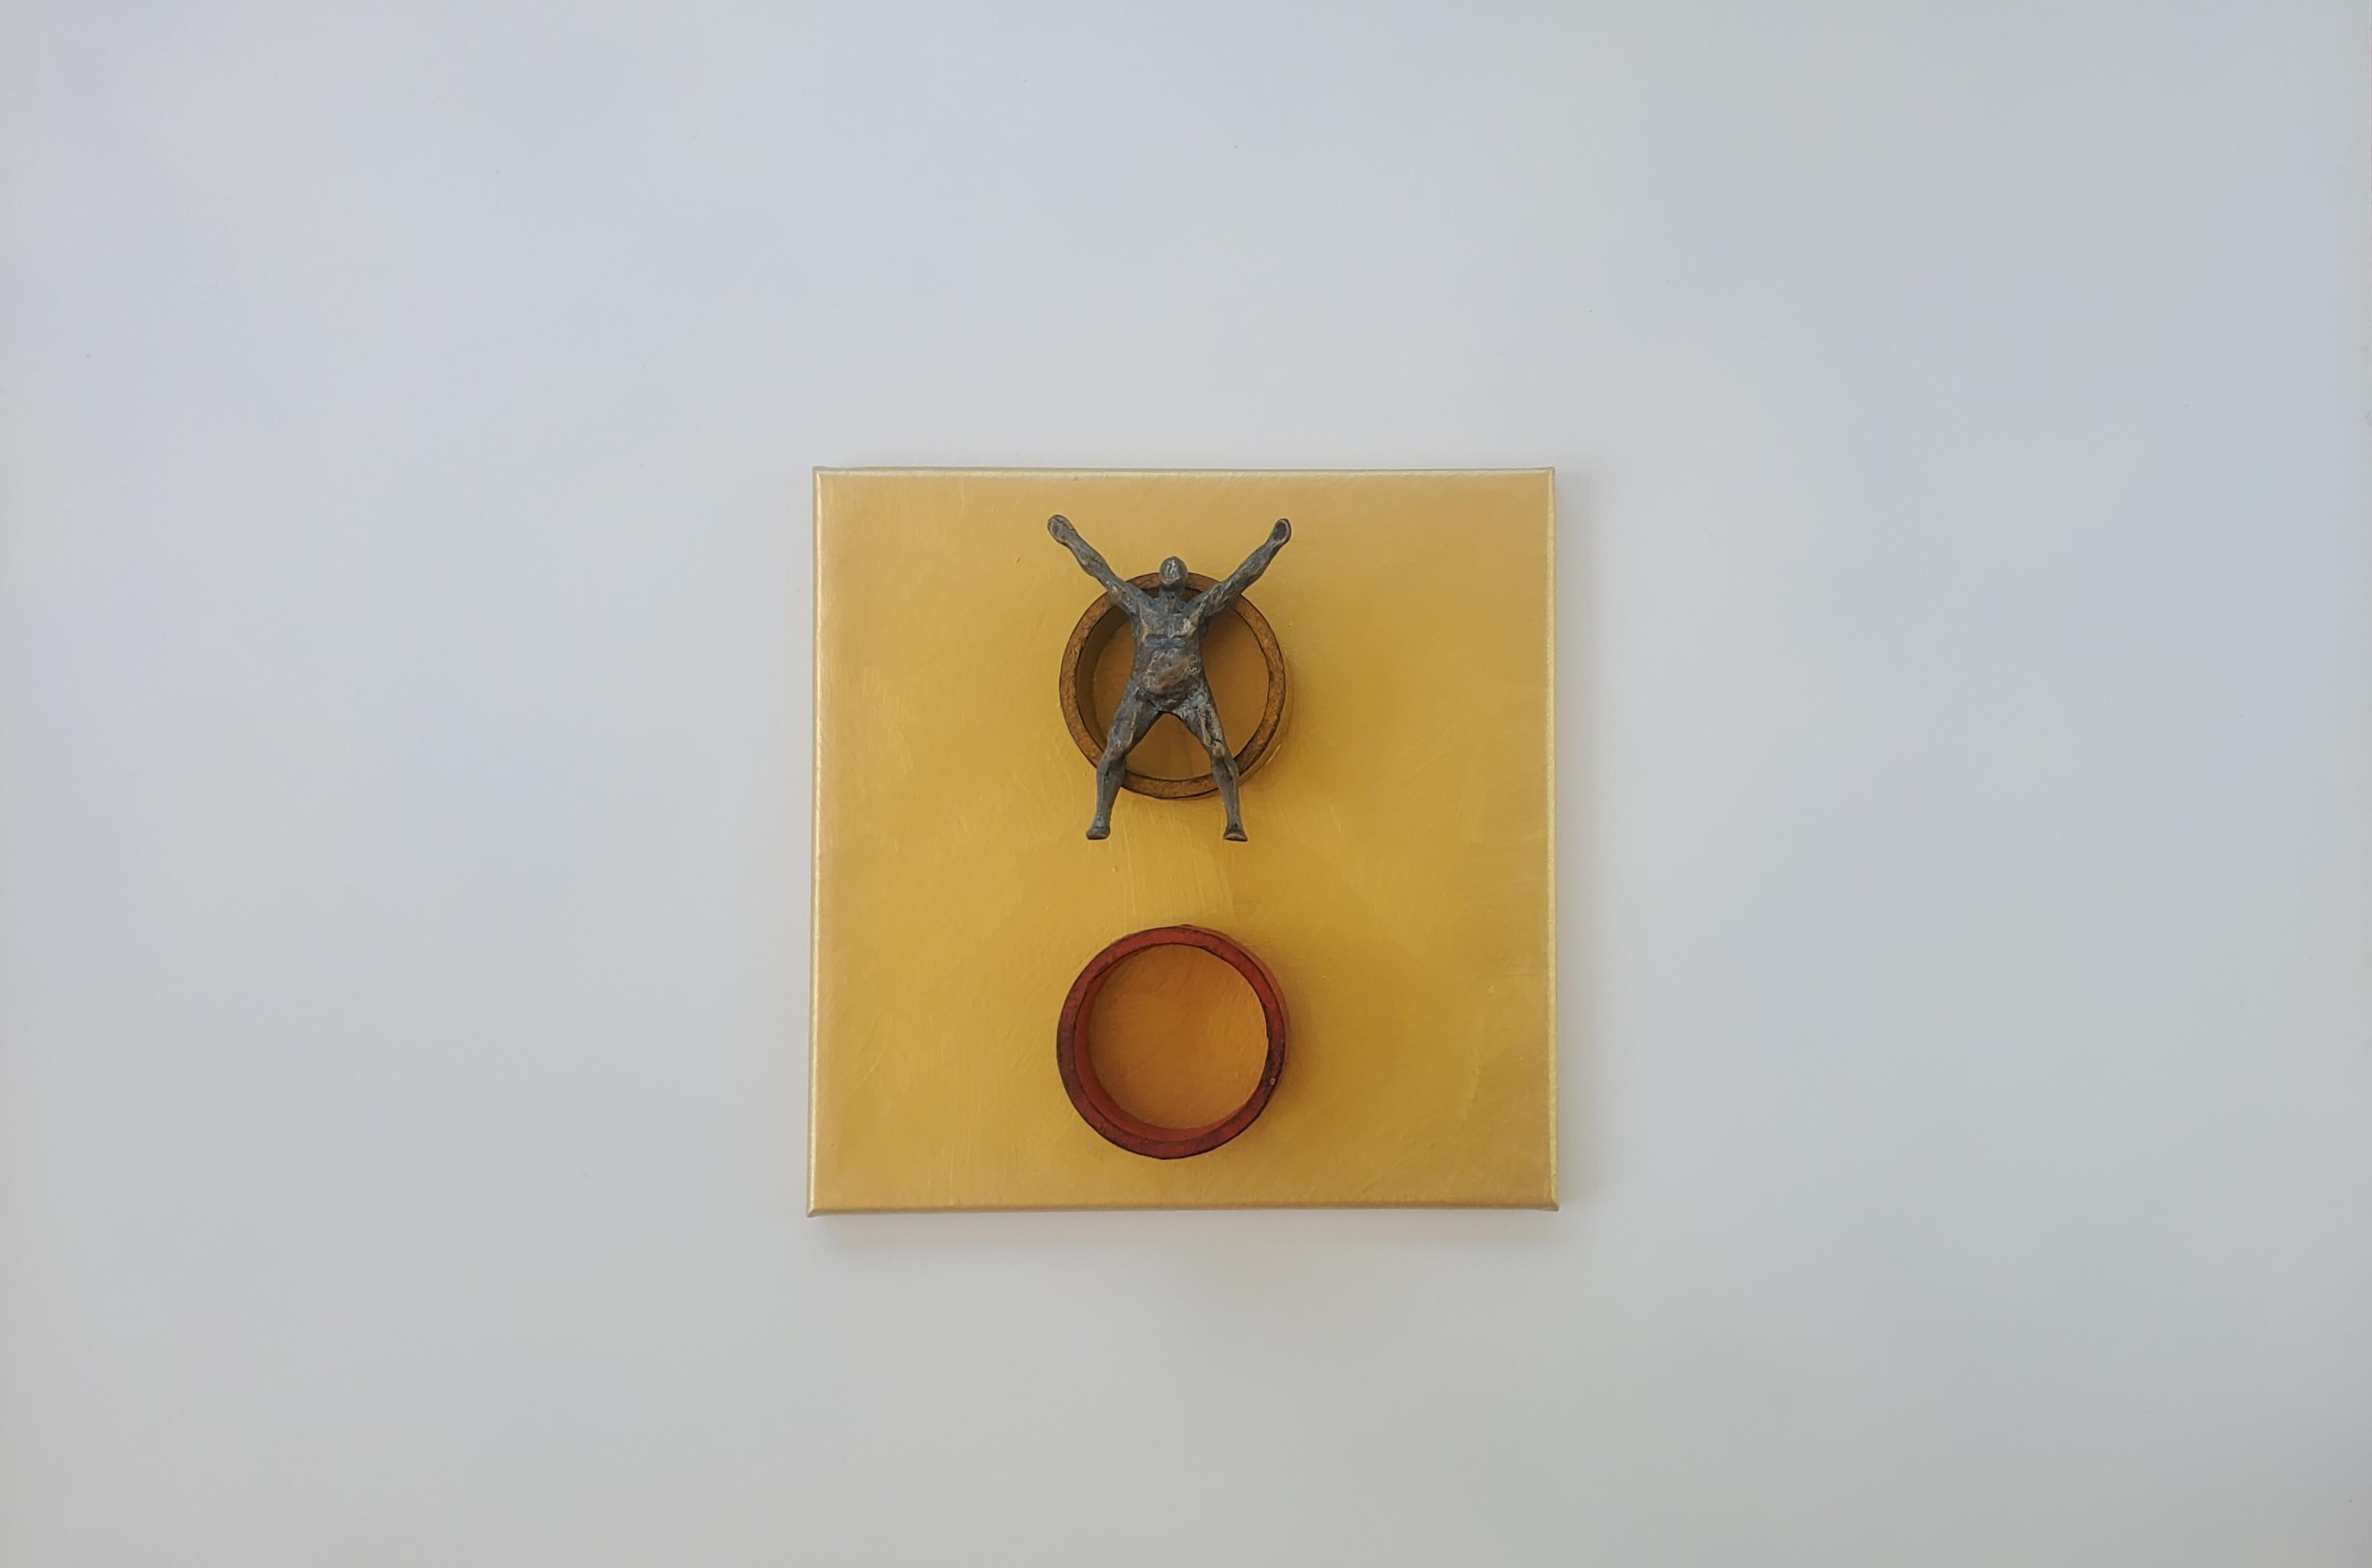 <p>Artist Comments<br>Artist Yelitza Diaz exhibits a bronze-colored figure on a circular structure made of cardboard, resin, and wood. She creates a new discourse with geometric shapes, allowing her to identify even more with the work. 